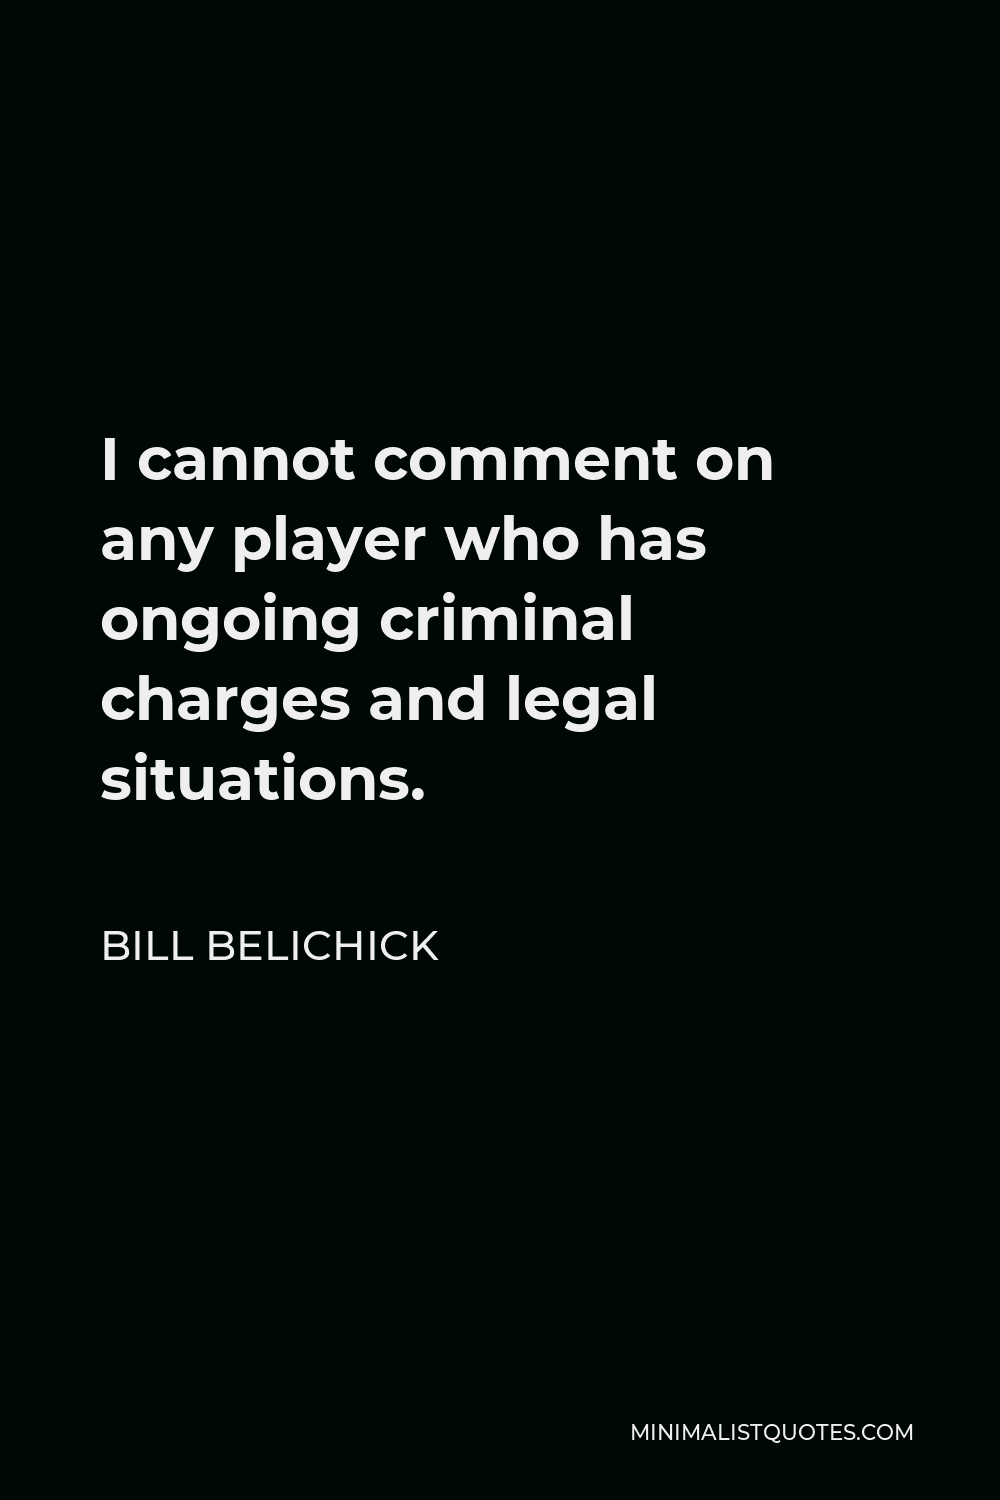 Bill Belichick Quote - I cannot comment on any player who has ongoing criminal charges and legal situations.